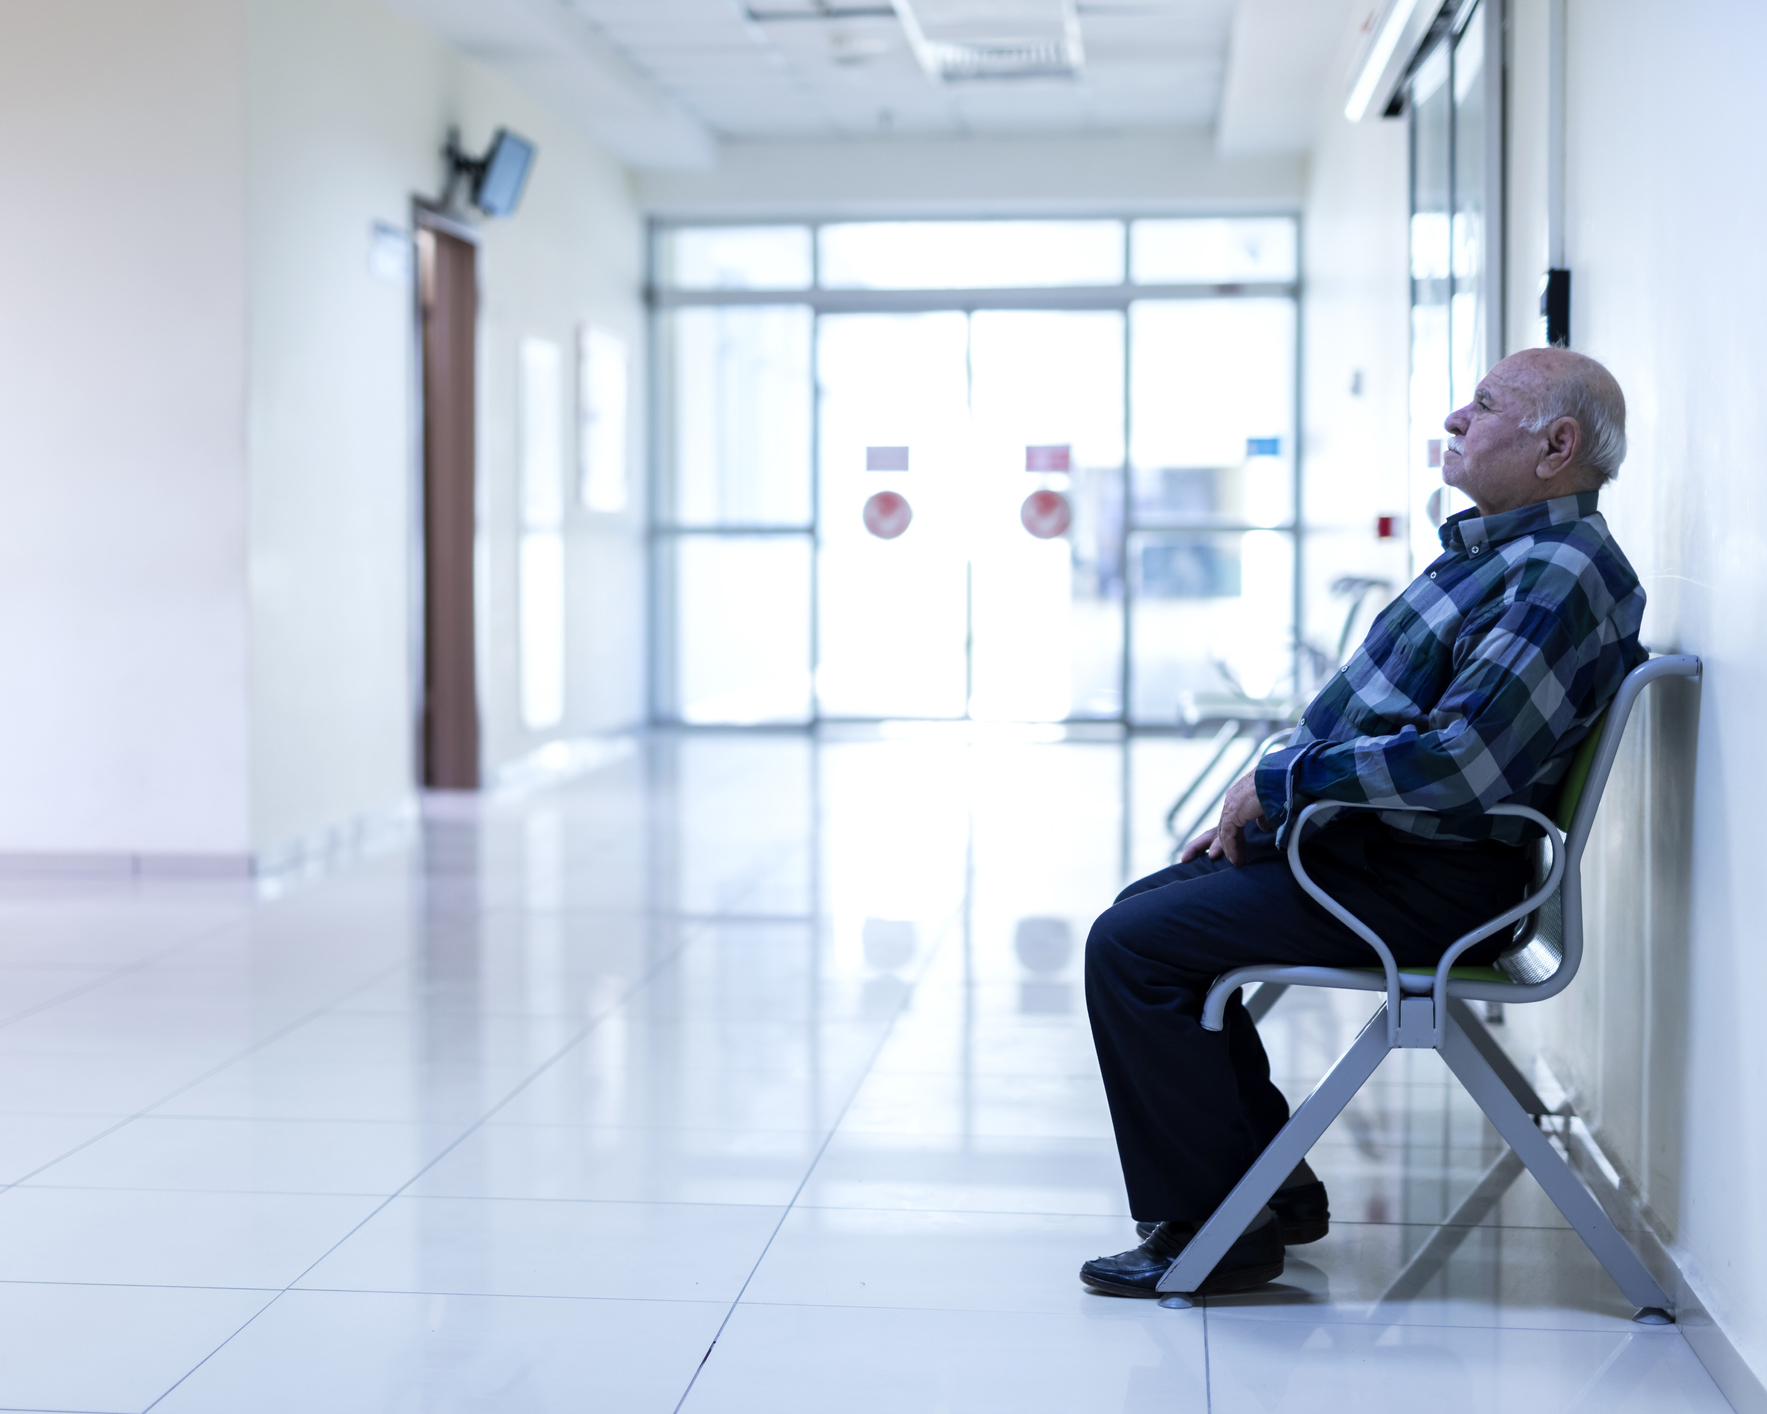 stock photo of older man in hospital waiting area